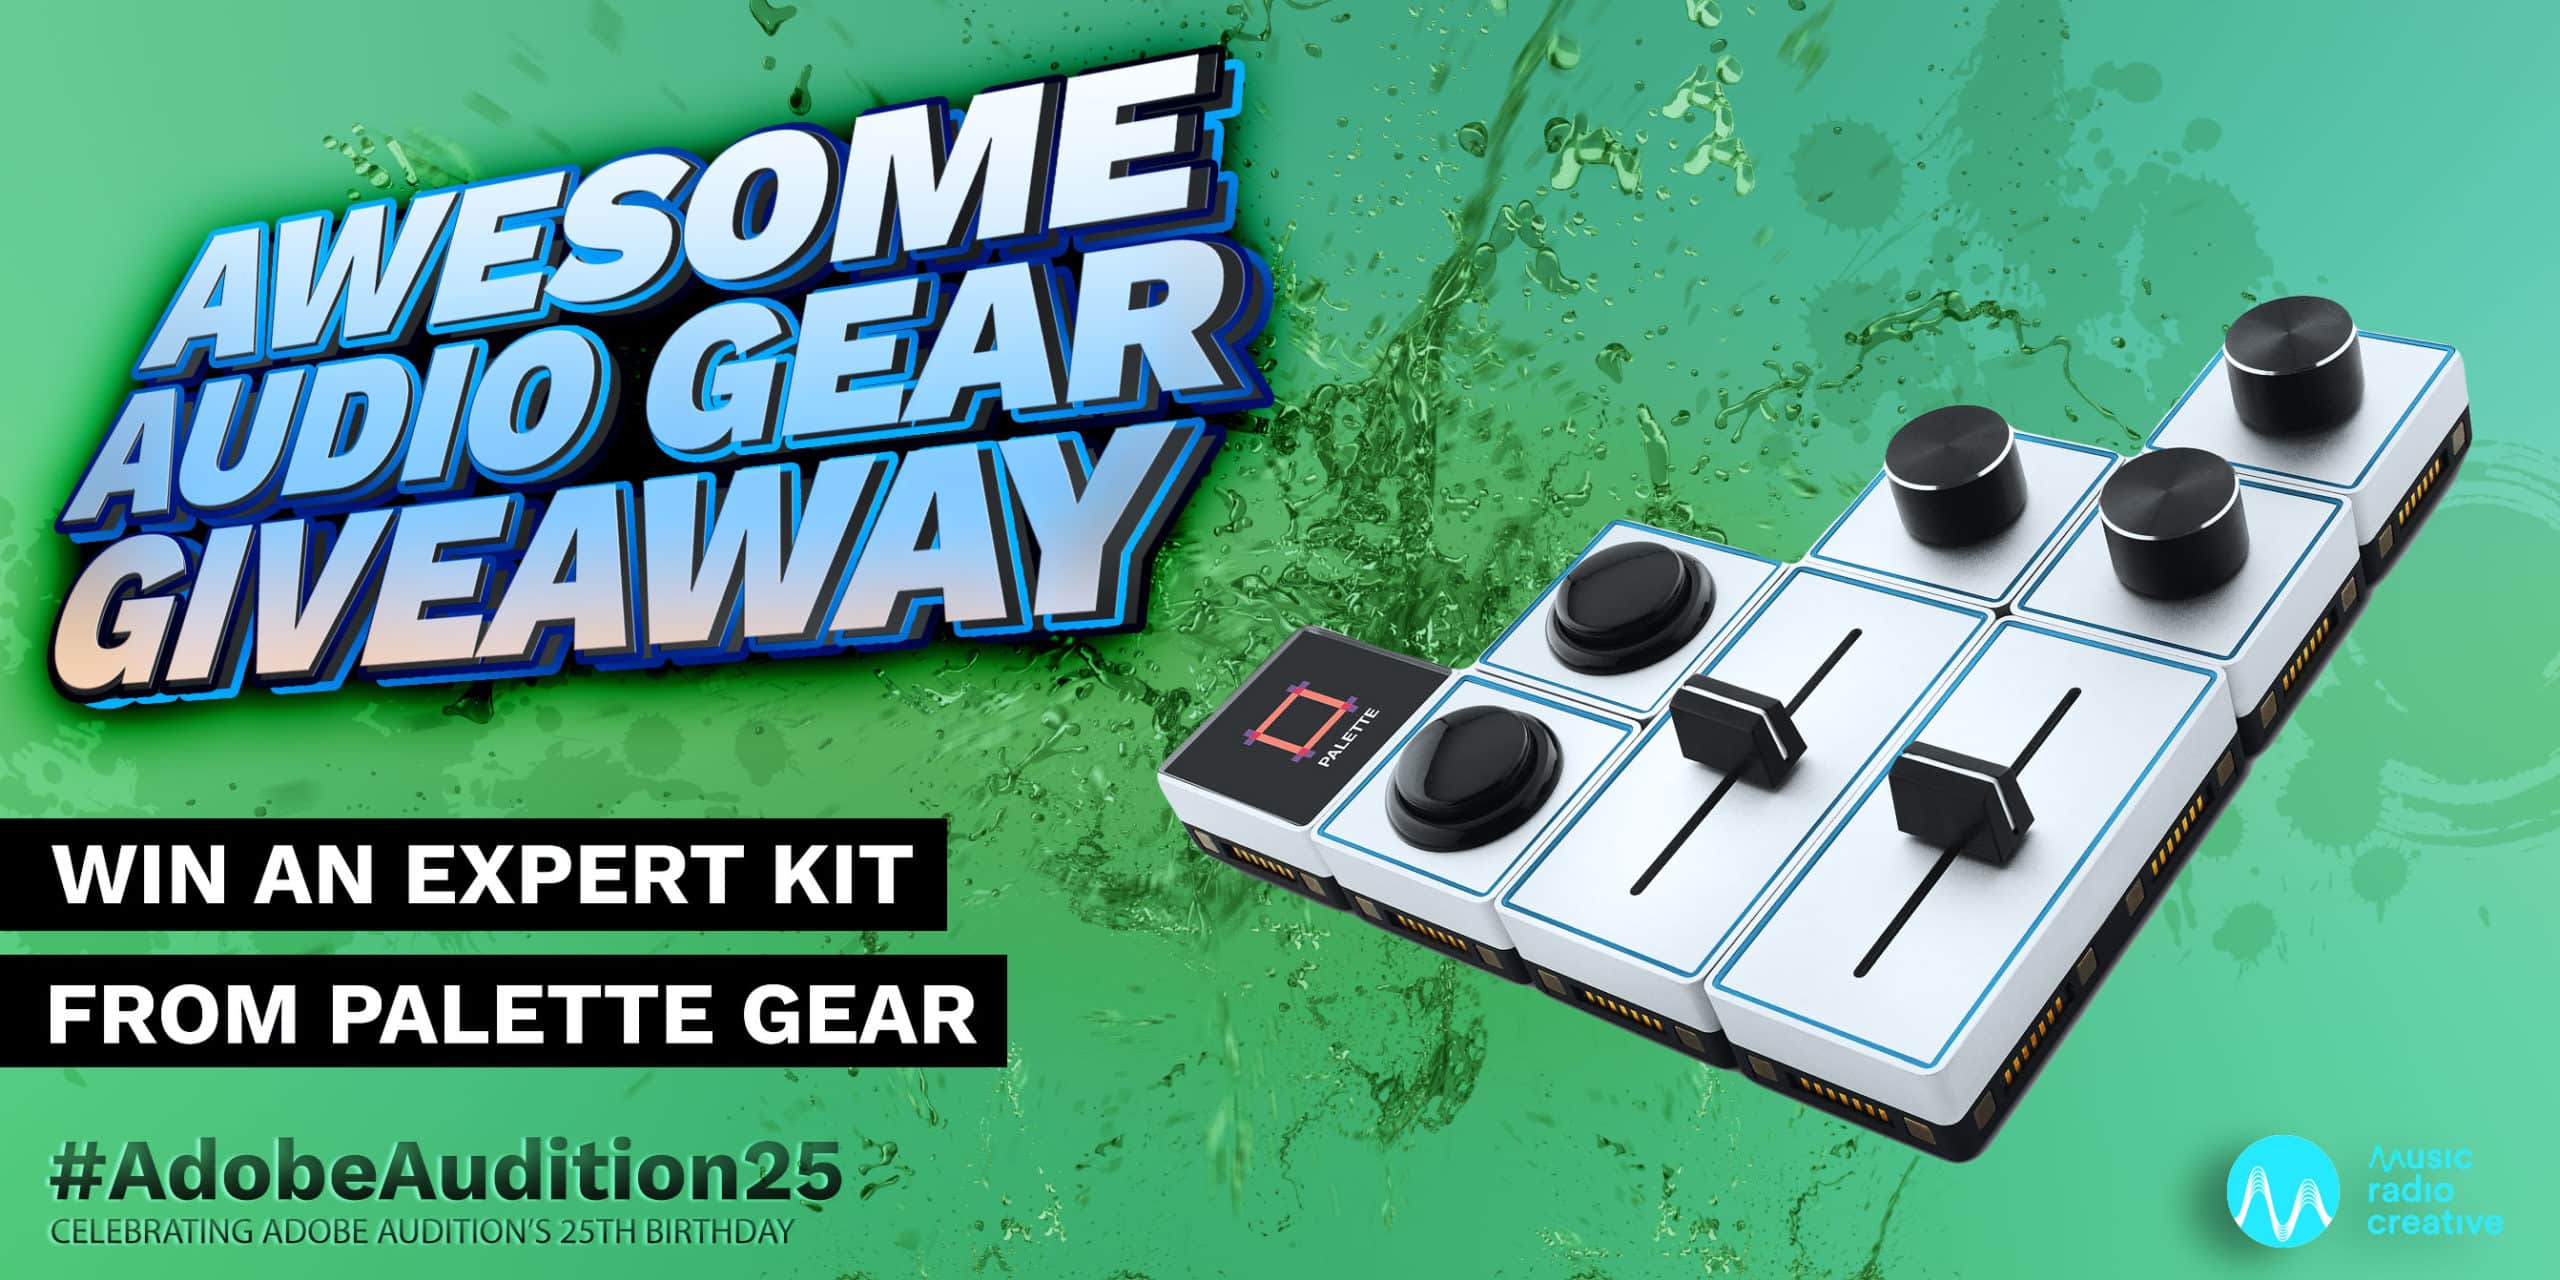 Win an Expert Kit from Palette Gear Awesome Audio Gear Giveaway  Music Radio Creative